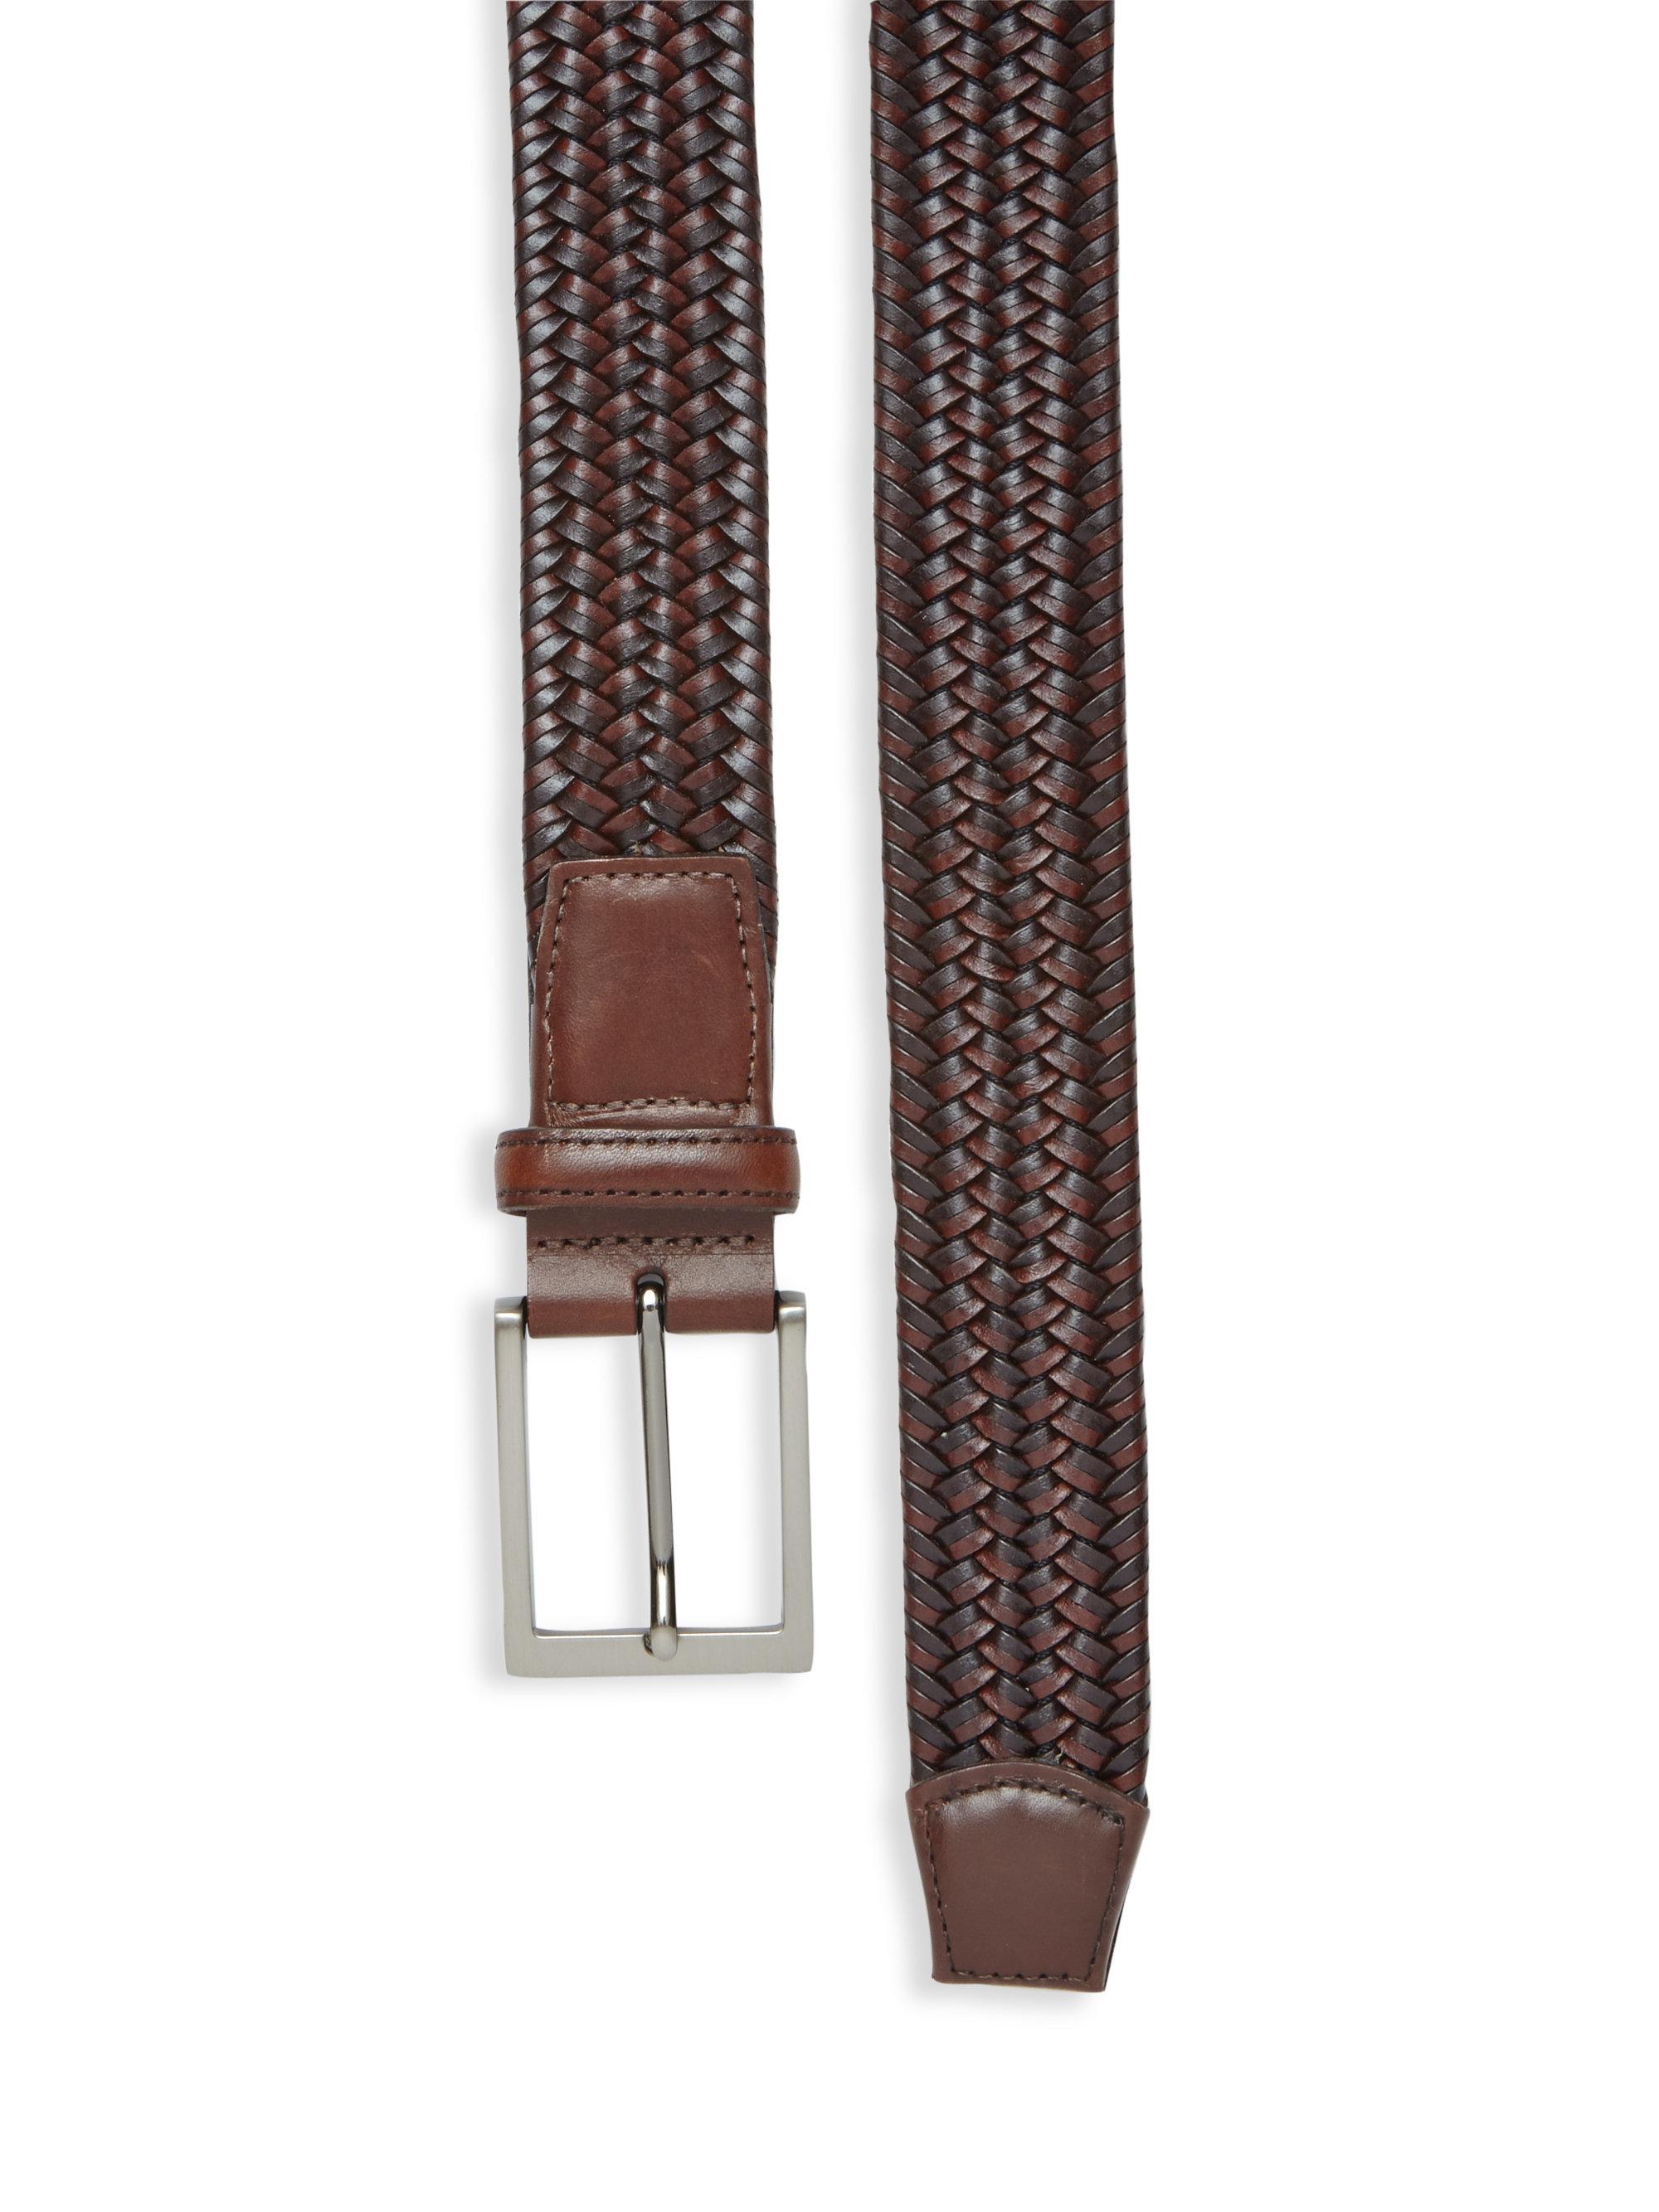 Lyst - Saks Fifth Avenue Braided Leather Blend Belt in Brown for Men